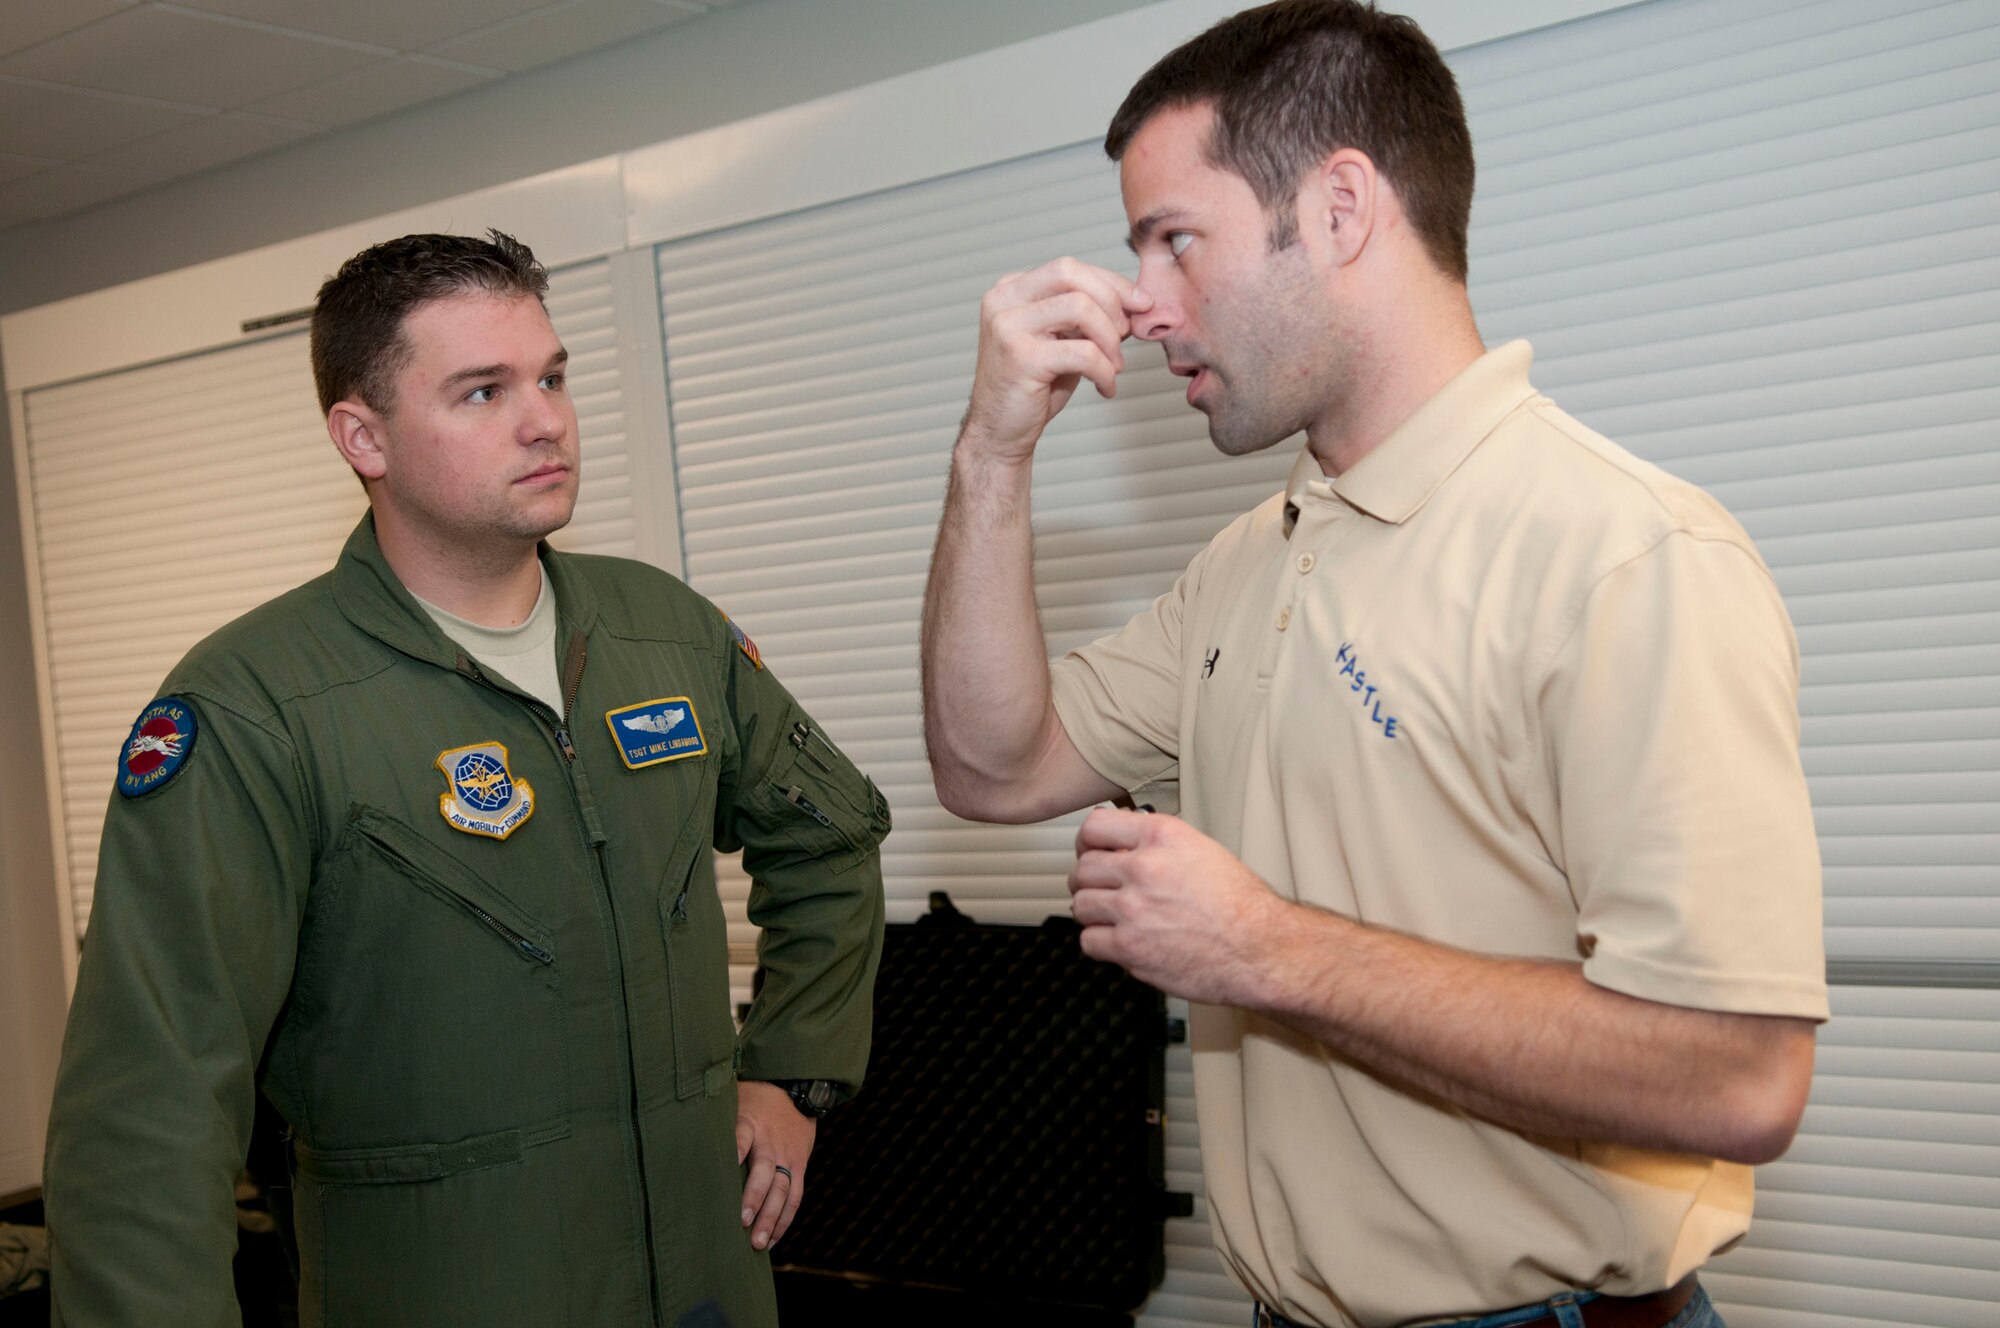 Steve Leadore, an equipment technician for the joint service aircrew mask - fixed wing (JSAM-FW) research team, explains the nosepiece for a mask to Technical Sgt. Michael Lindamood, a loadmaster for the 167th Airlift Squadron. A Department of Defense research team working on the development of a joint service aircrew mask conducted field assessments at the 167th Airlift Wing, West Virginia Air National Guard unit in Martinsburg, WV,  December 7, 2011. The team had aircrew in each of the flying positions don the mask and accompanying gear and perform their duties on a C-5 aircraft. (Air National Guard photo by Master Sgt. Emily Beightol-Deyerle)